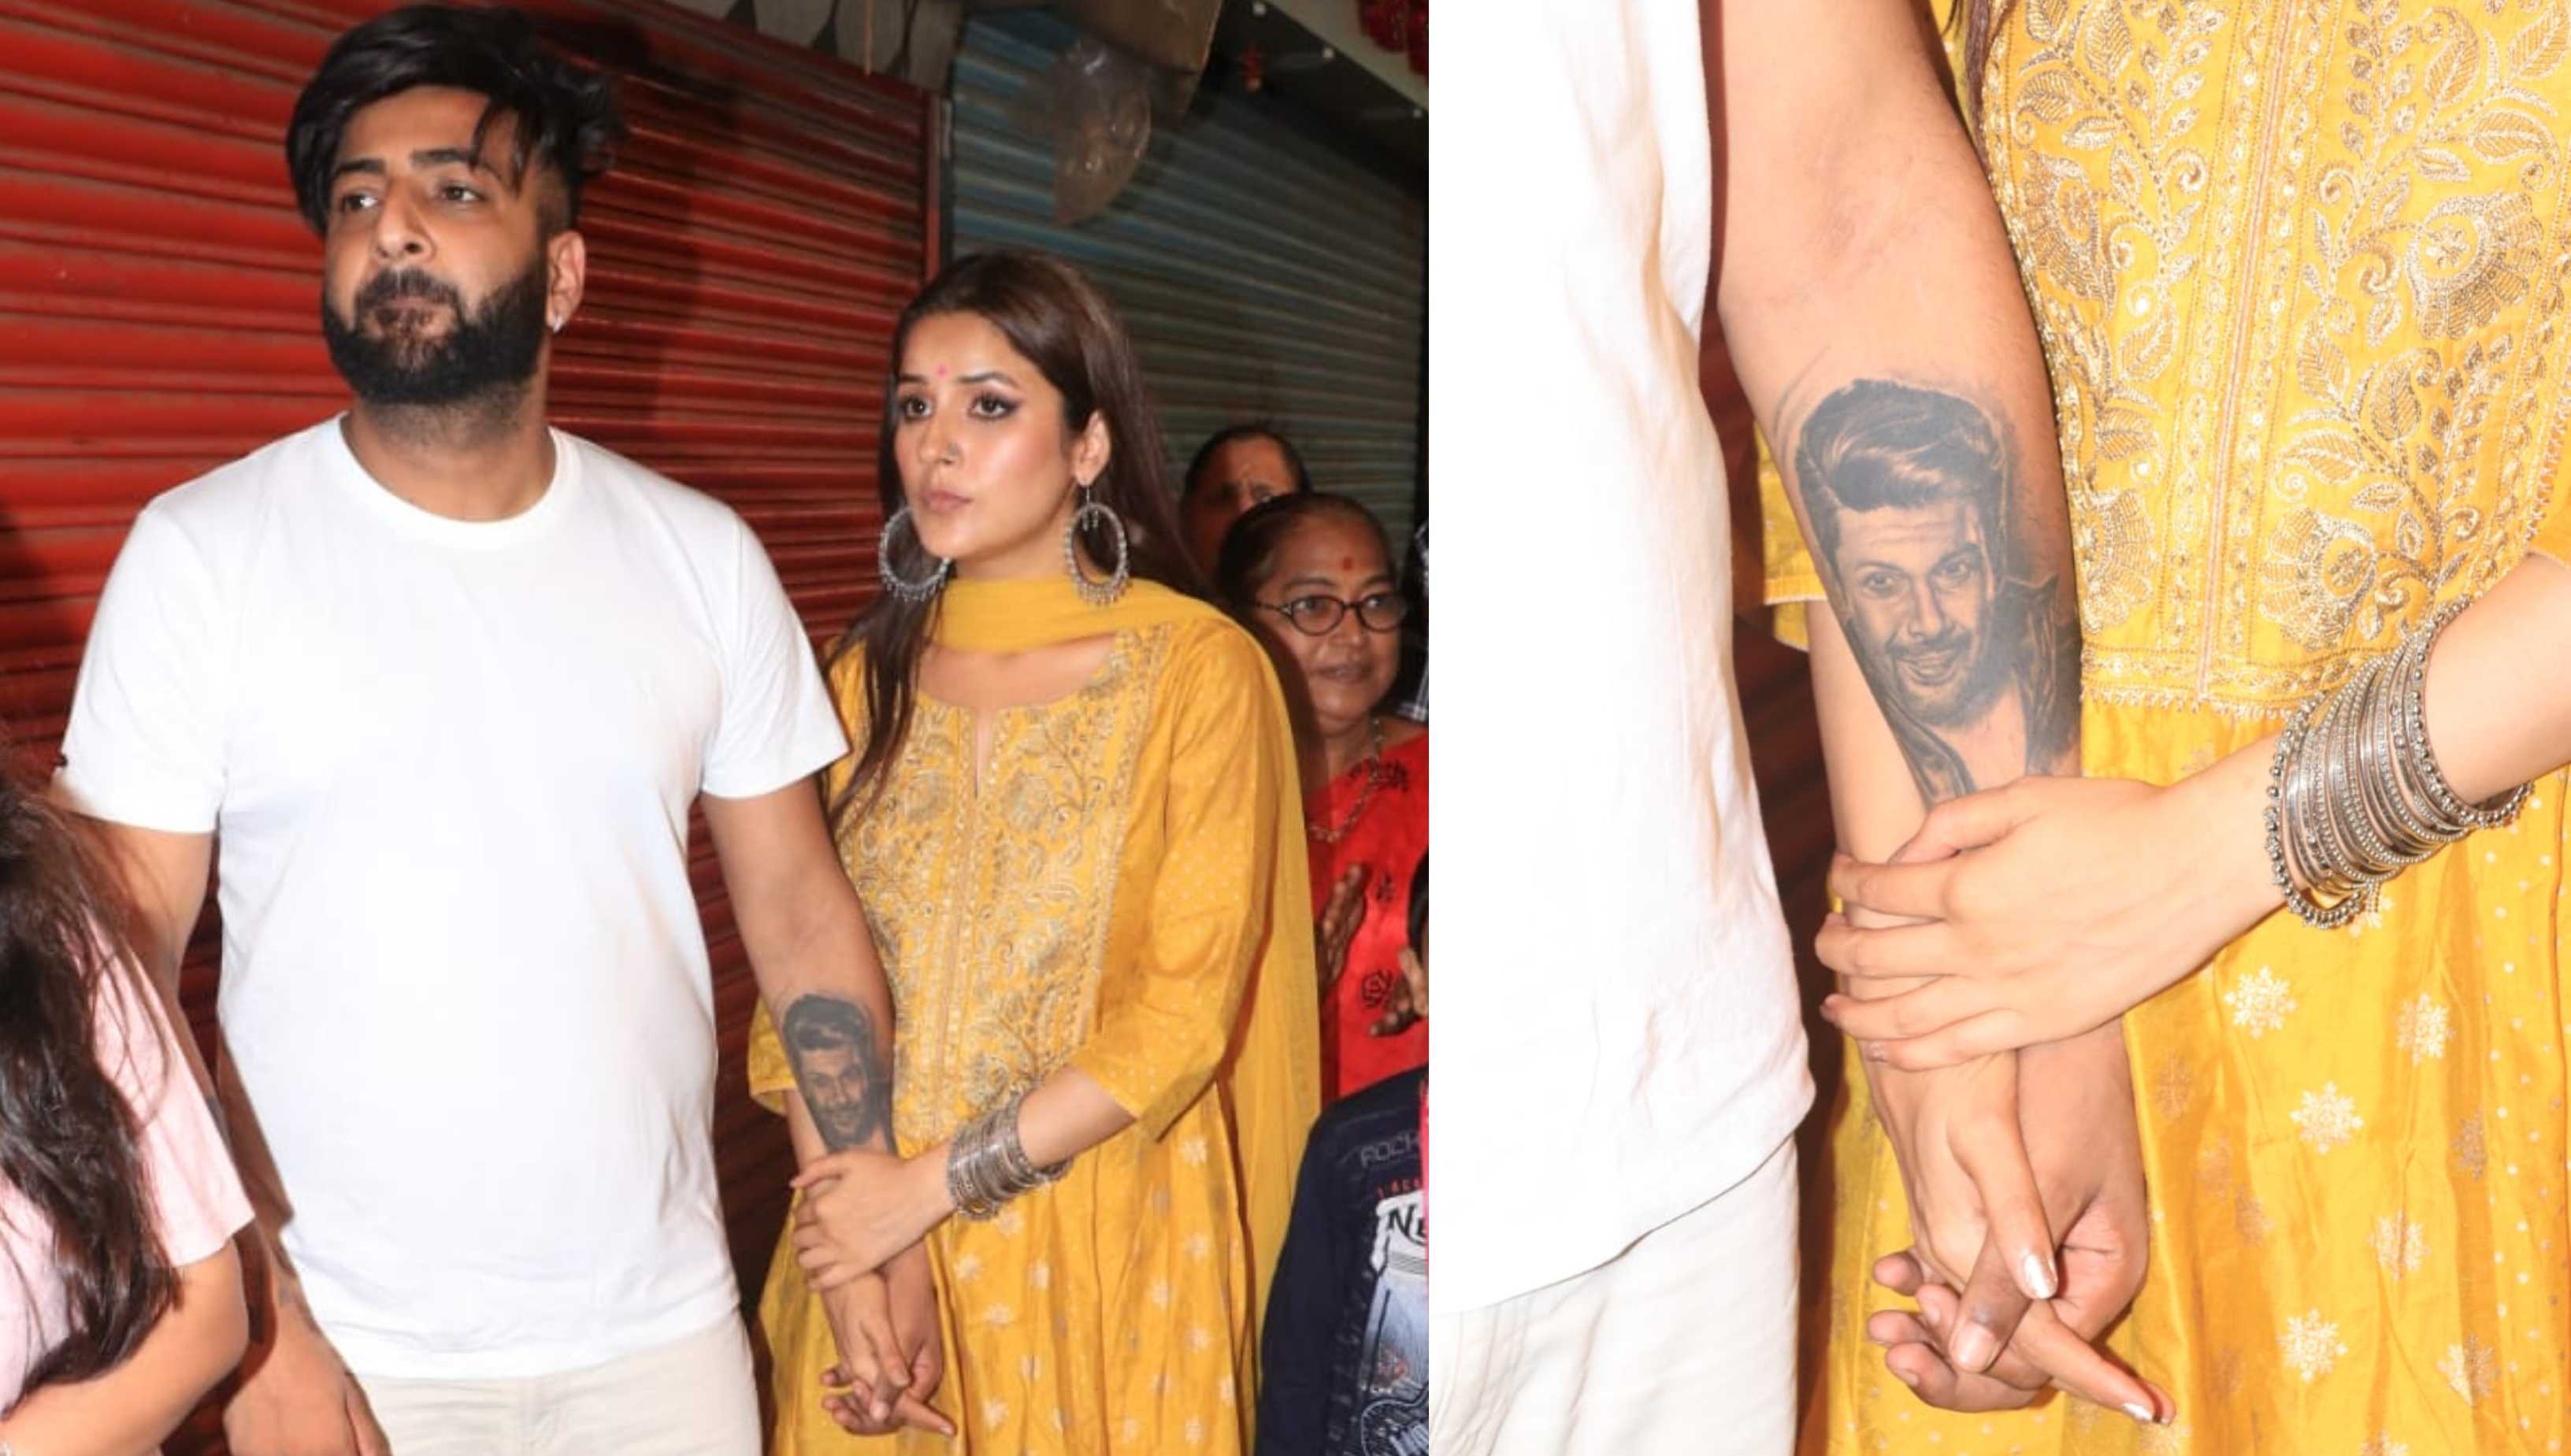 Shehnaaz Gill holds onto brother Shehbaz’s arm with Sidharth Shukla’s tattoo as they seek blessings at Lalbaugcha Raja